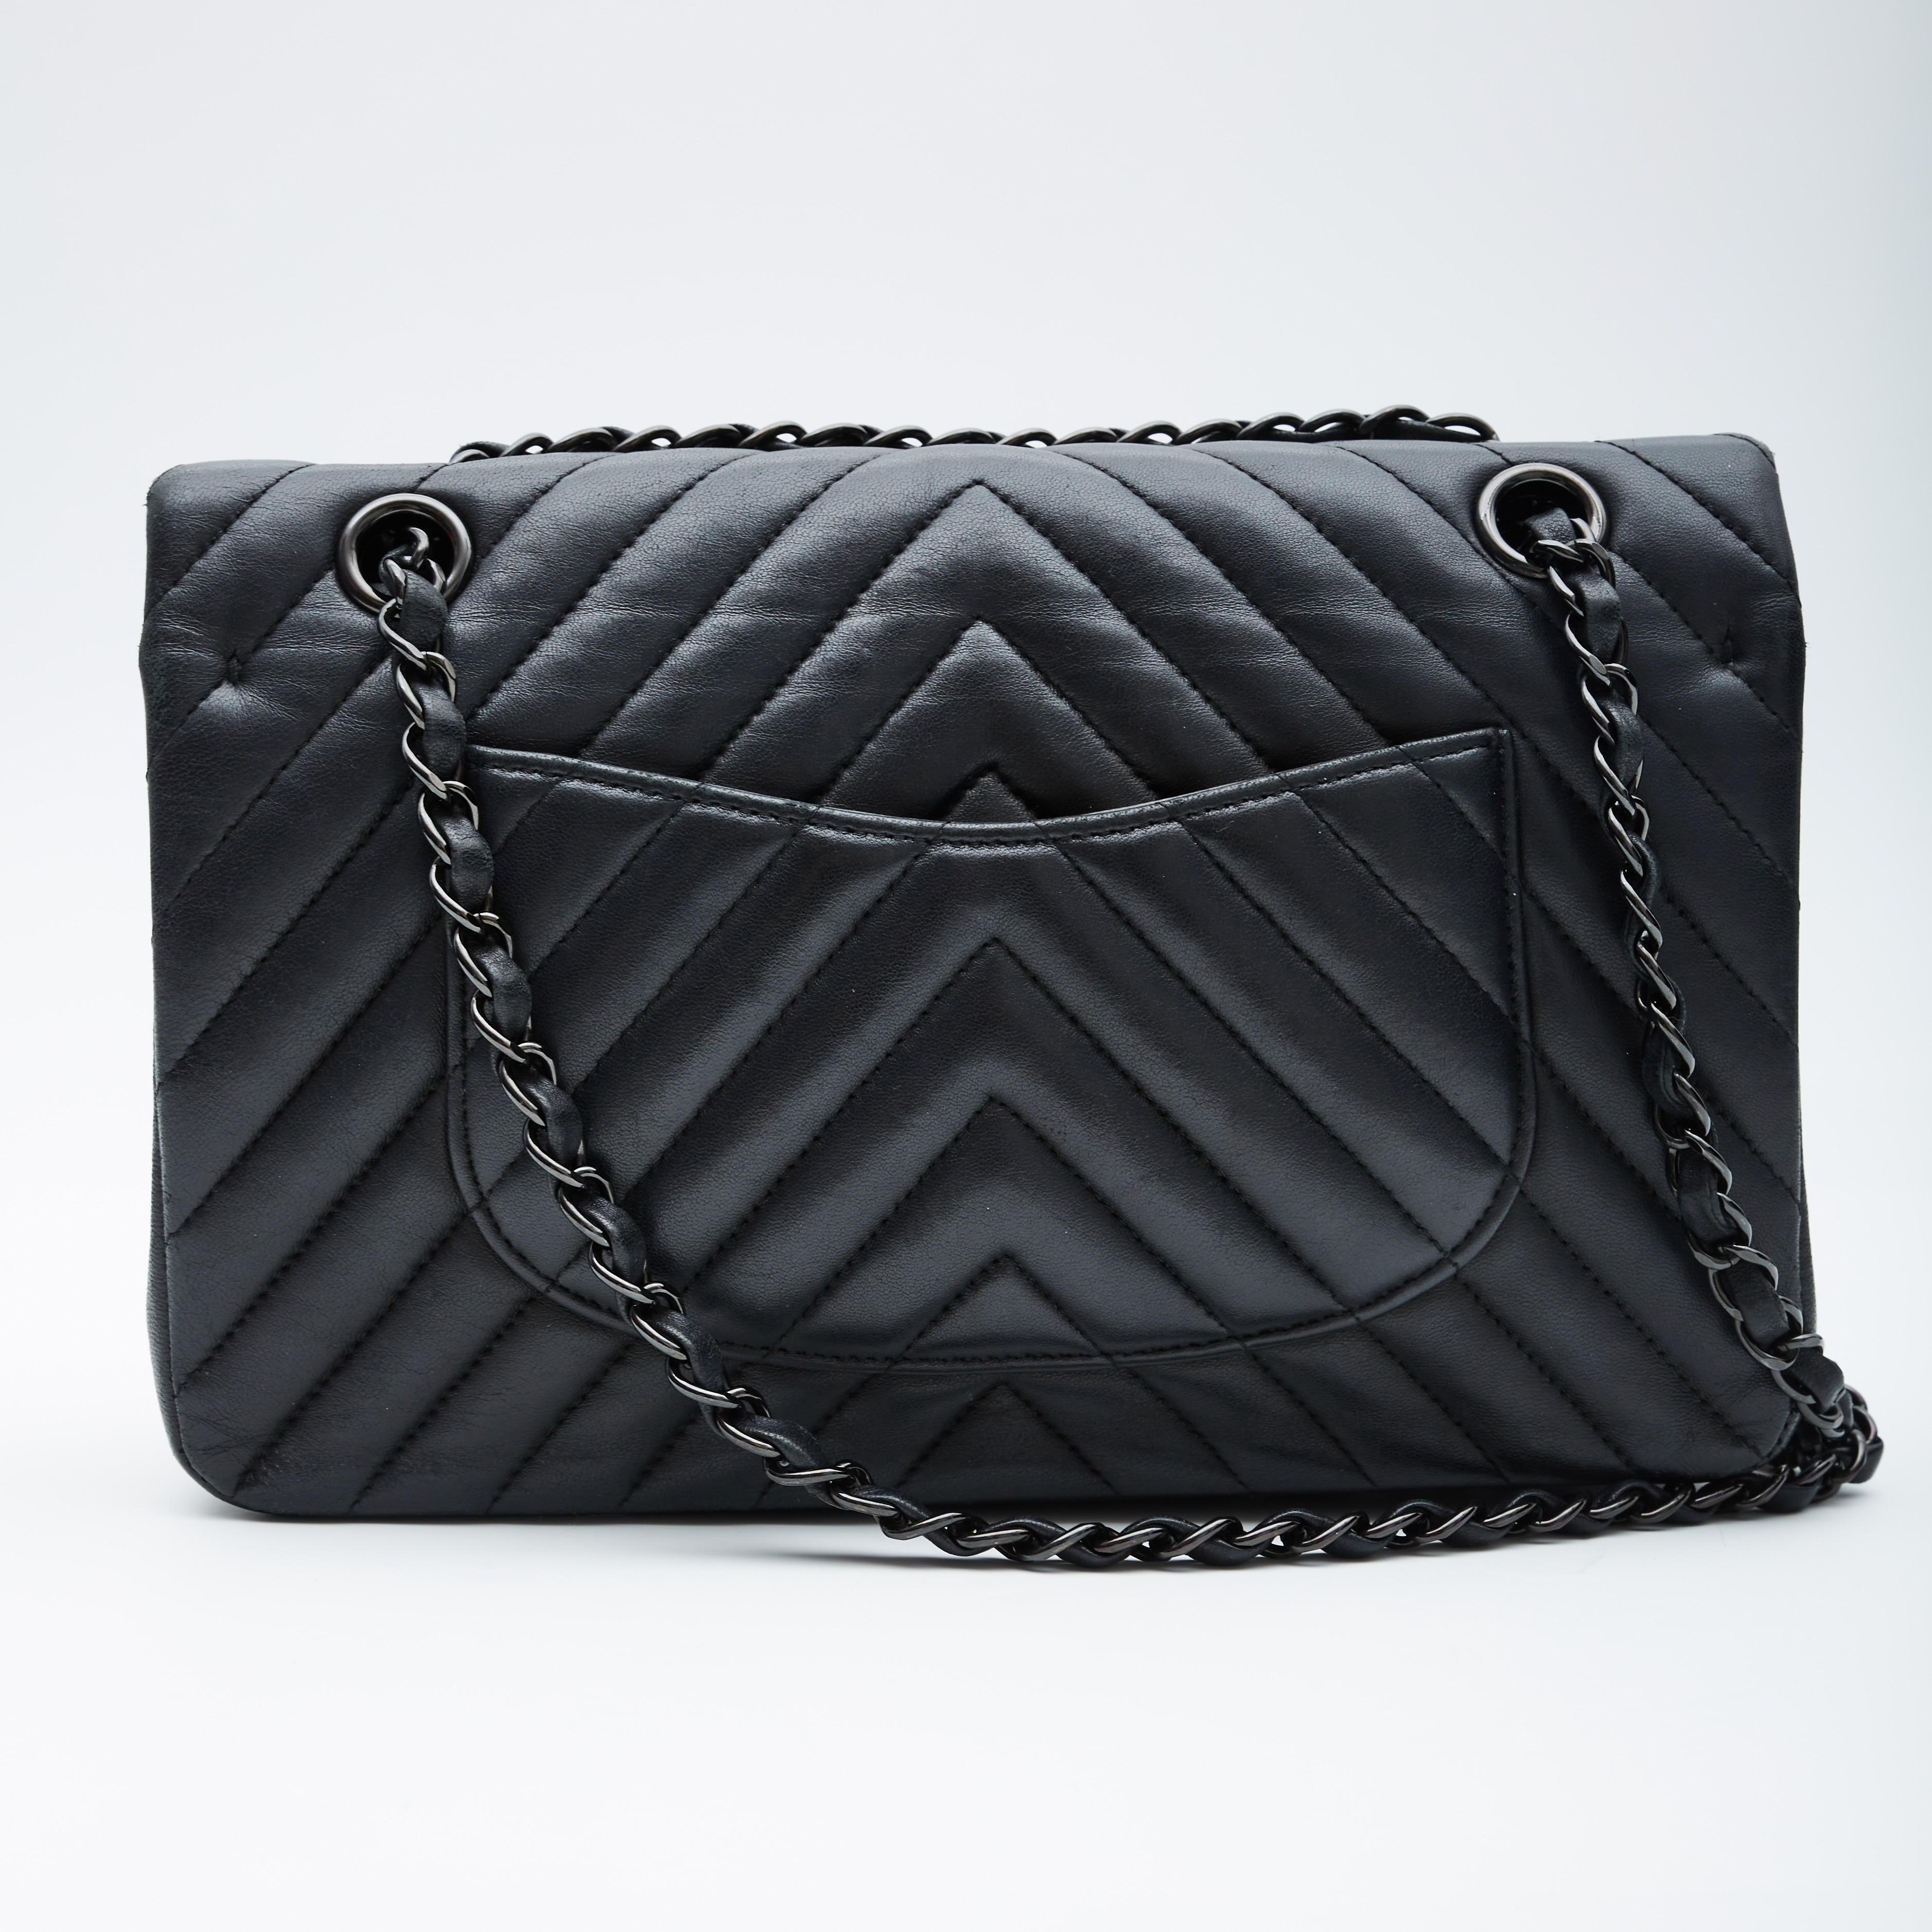 This shoulder bag is made of chevron-quilted luxurious lambskin leather in black. The bag features black chain links interlaced with leather shoulder straps, a front flap with a black Mademoiselle Chanel CC turn lock, a second flap with snap closure